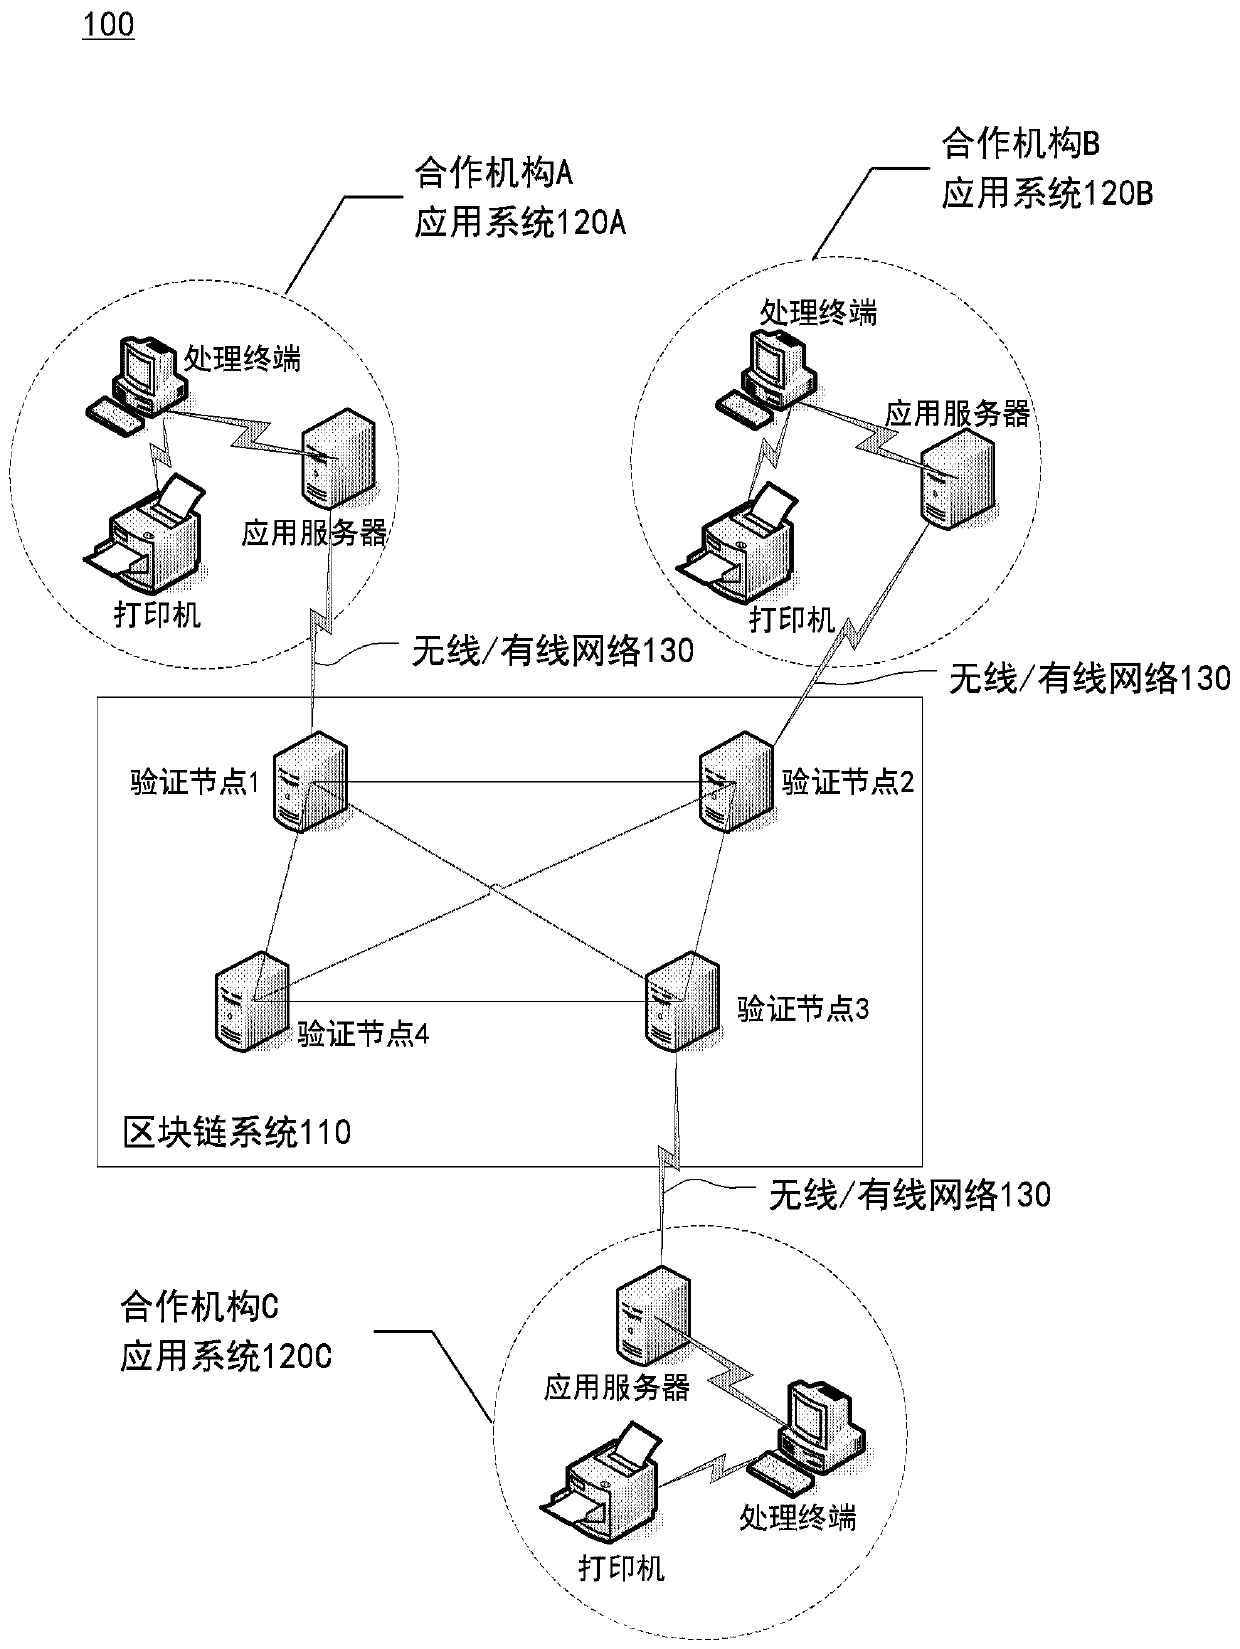 Cargo waybill processing method and device based on block chain, computing equipment and medium